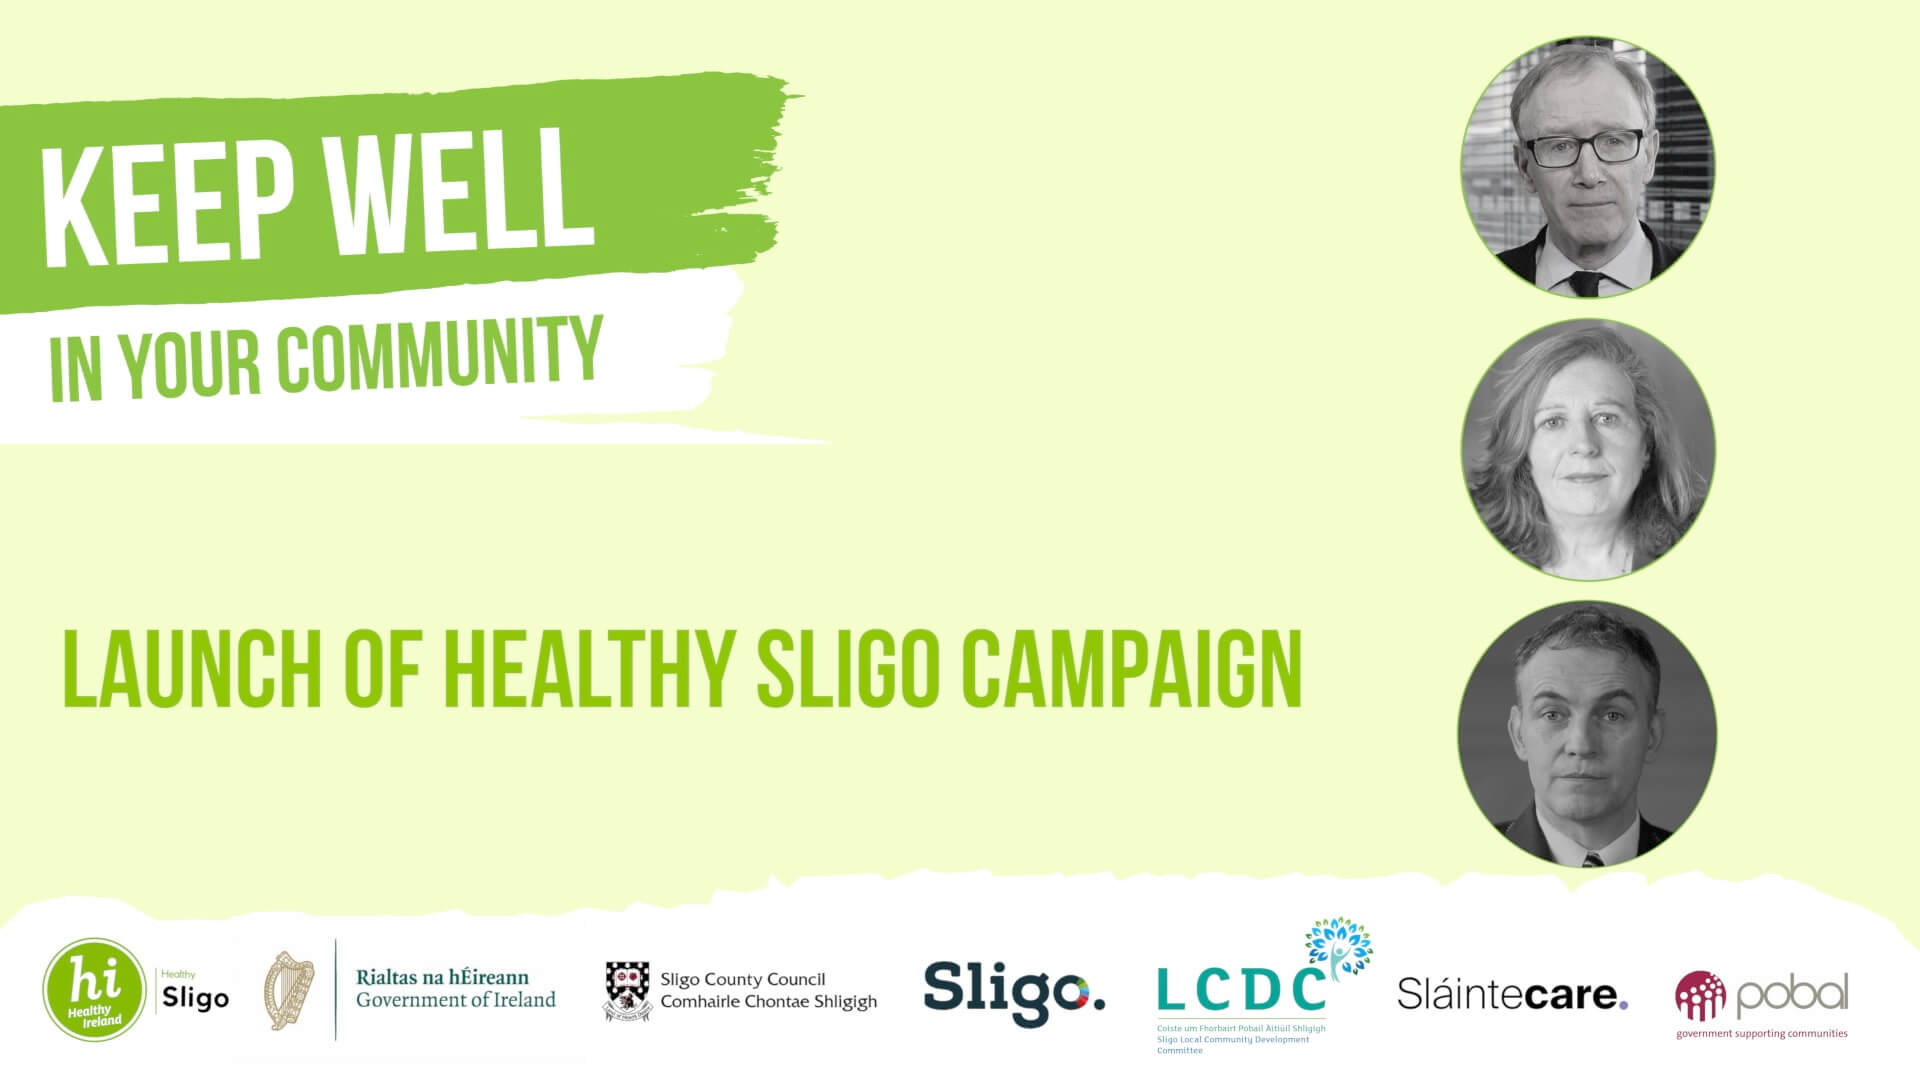 New Keep Well Video Series Launched in Sligo